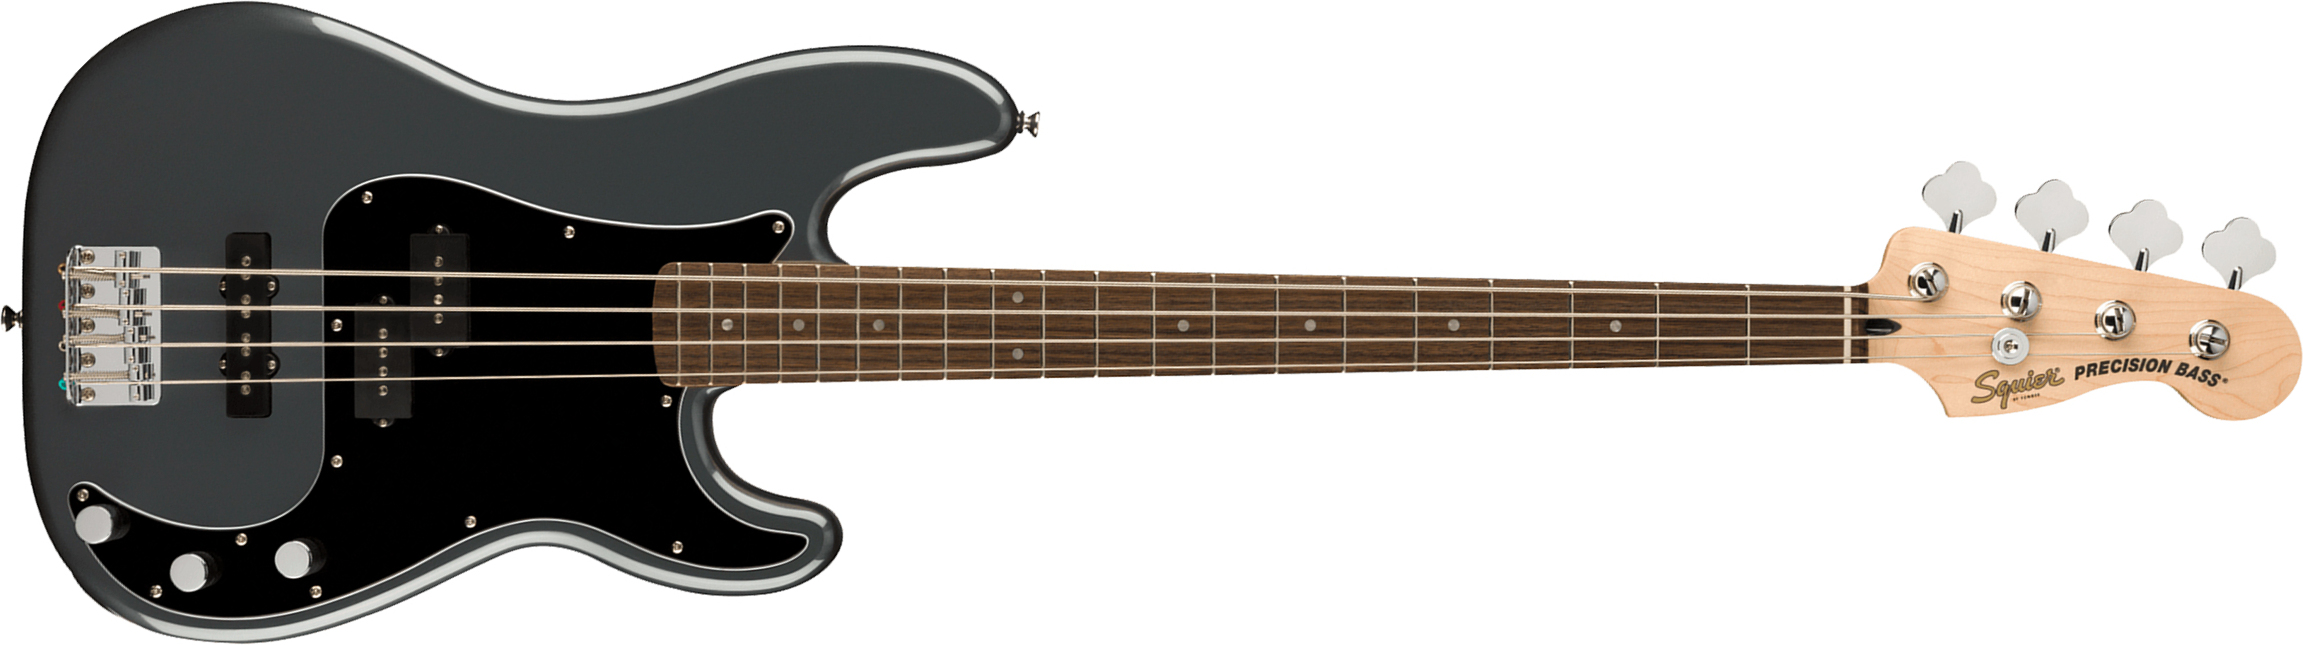 Squier Precision Bass Affinity Pj 2021 Lau - Charcoal Frost Metallic - Solid body electric bass - Main picture